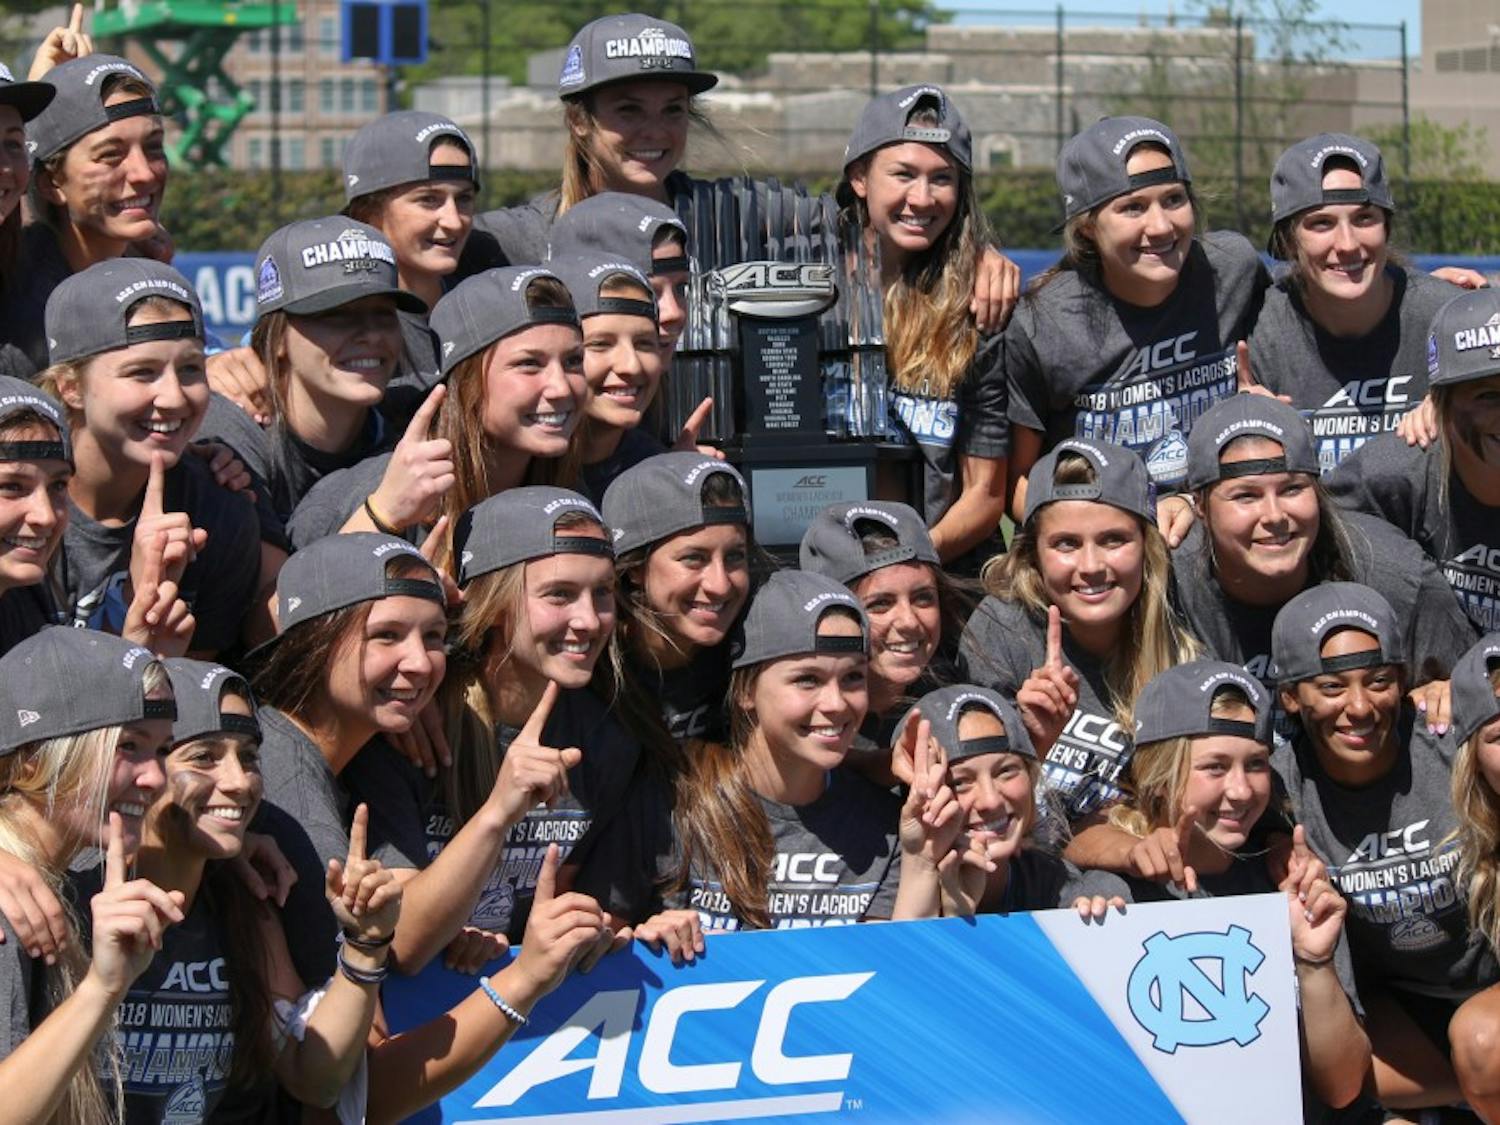 “The UNC women’s lacrosse team received their third straight ACC Women’s Lacrosse Championship trophy on Sunday evening at Koskinen Stadium.”